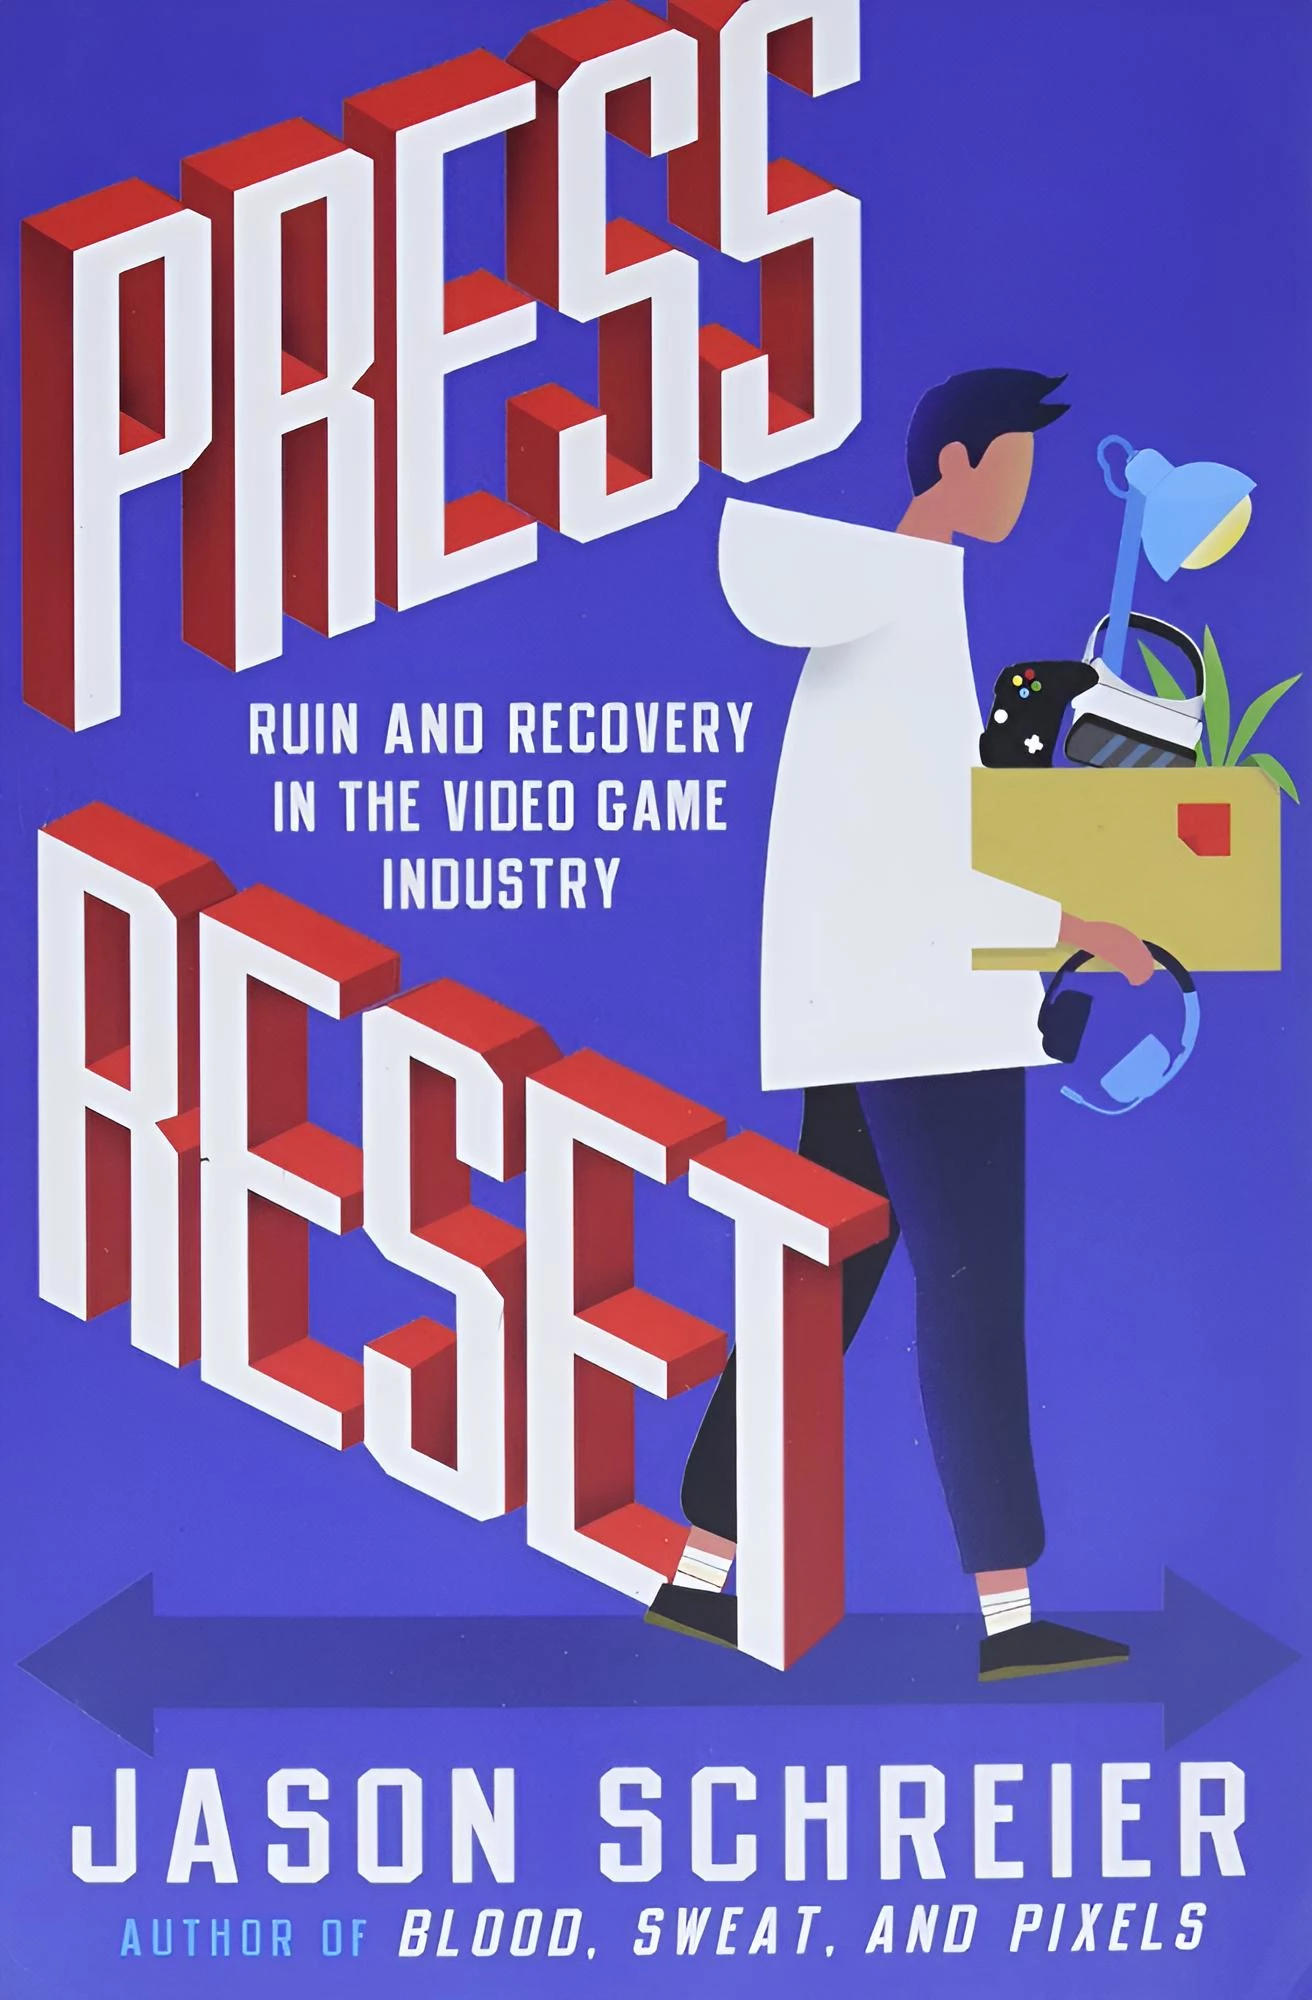 Review of the book “Press Reset: Burnout and Recovery in the Video Game Industry” by Jason Schreier